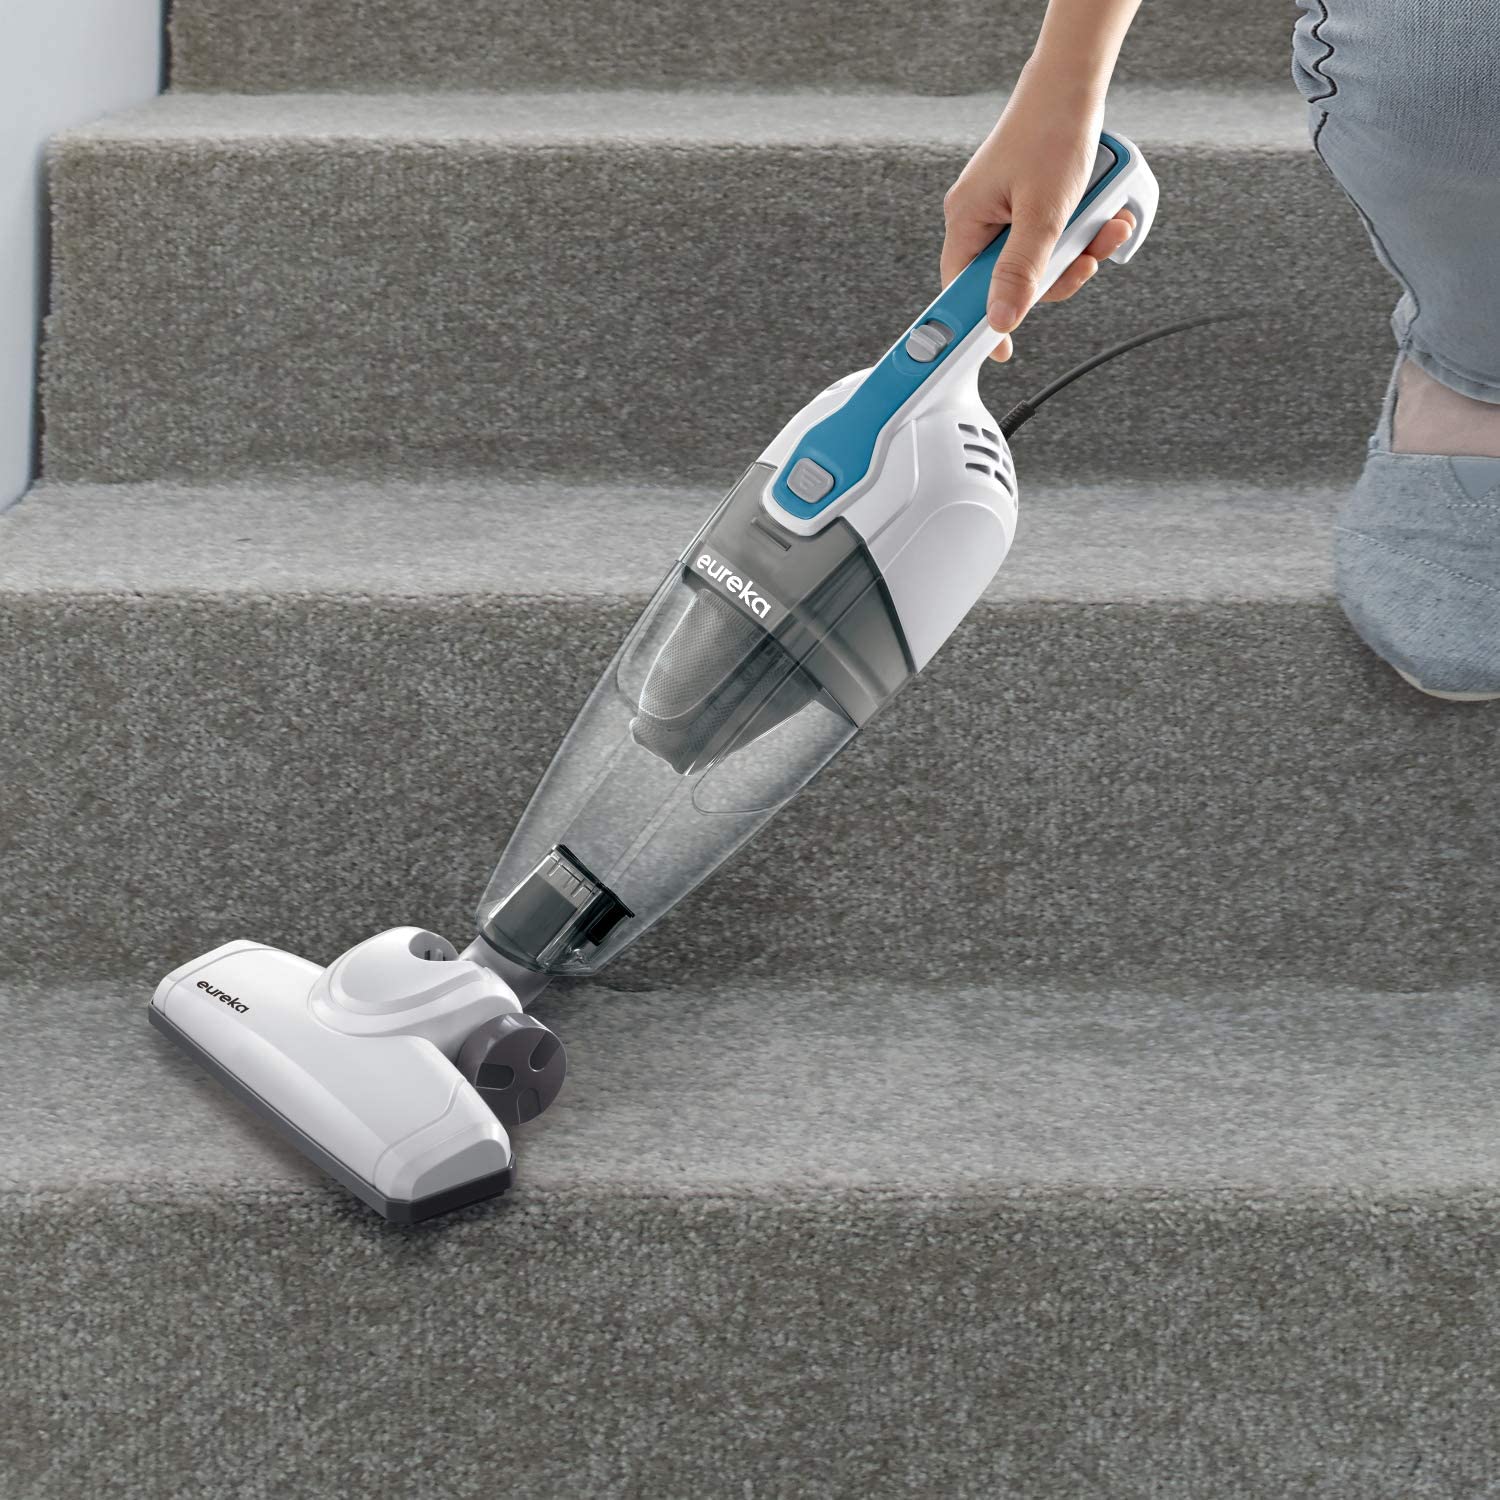 mistakes you should avoid when buying a vacuum cleaner